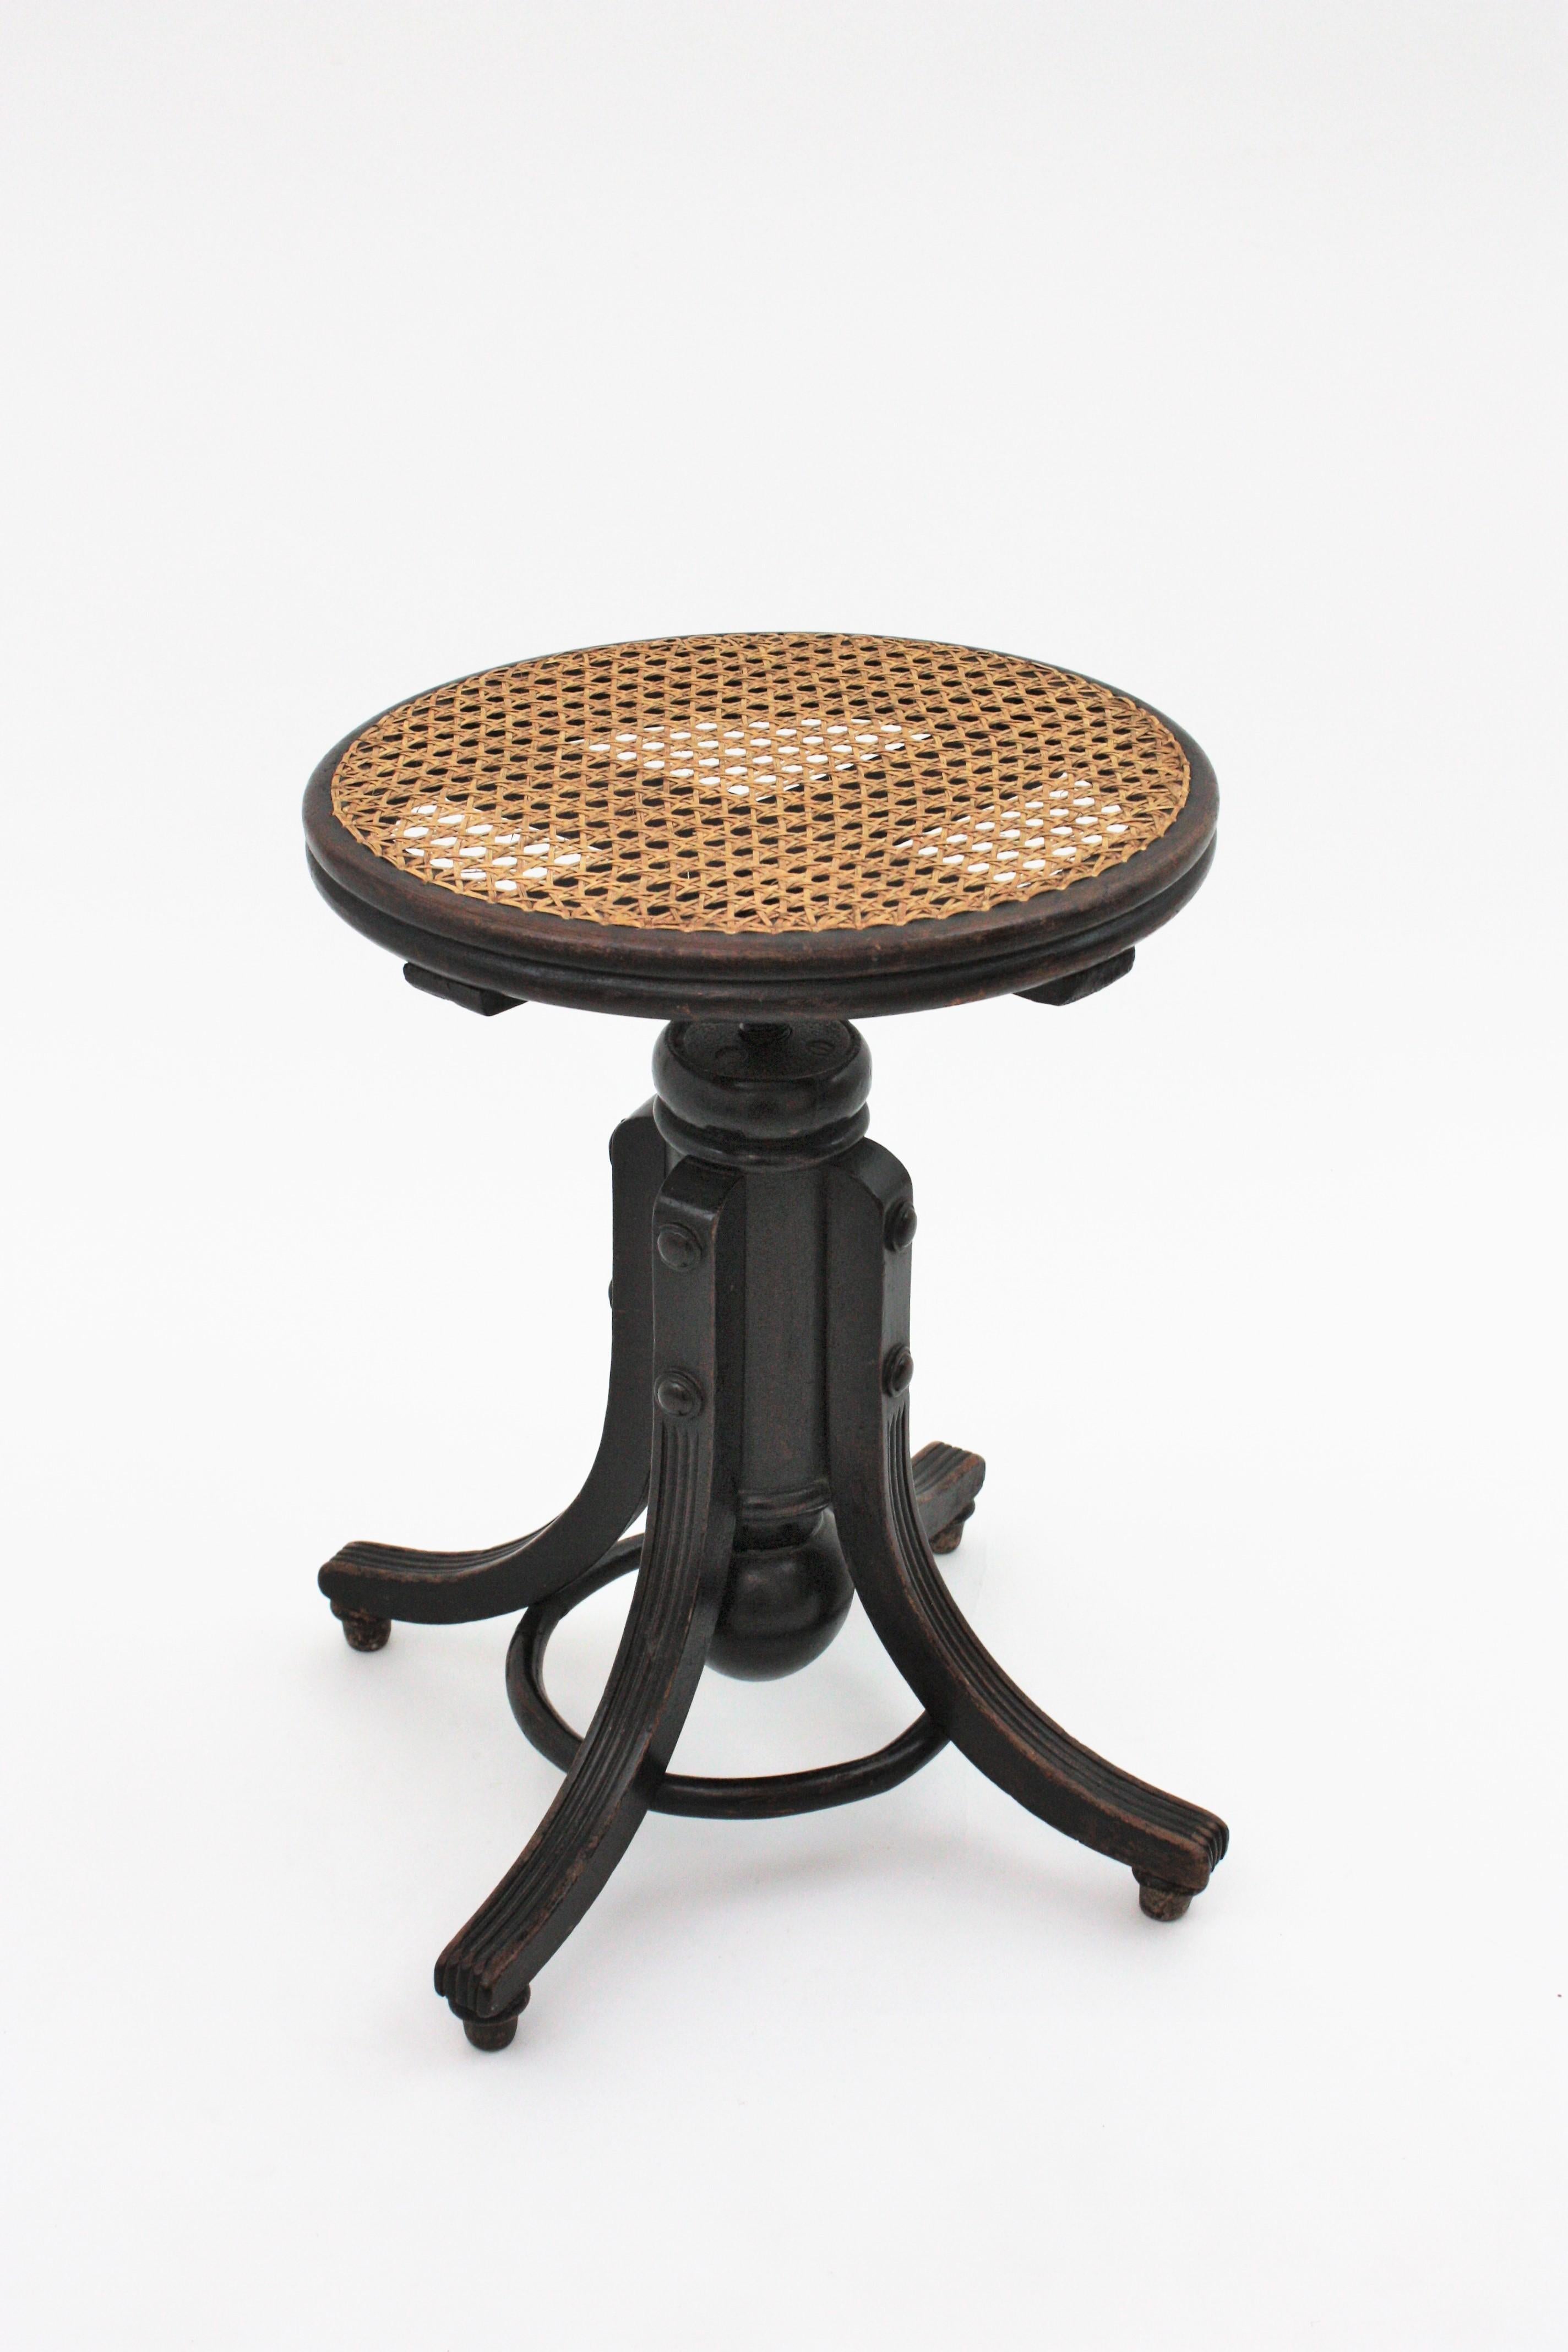 Thonet Style Revolving Stool with Cane Seat 2